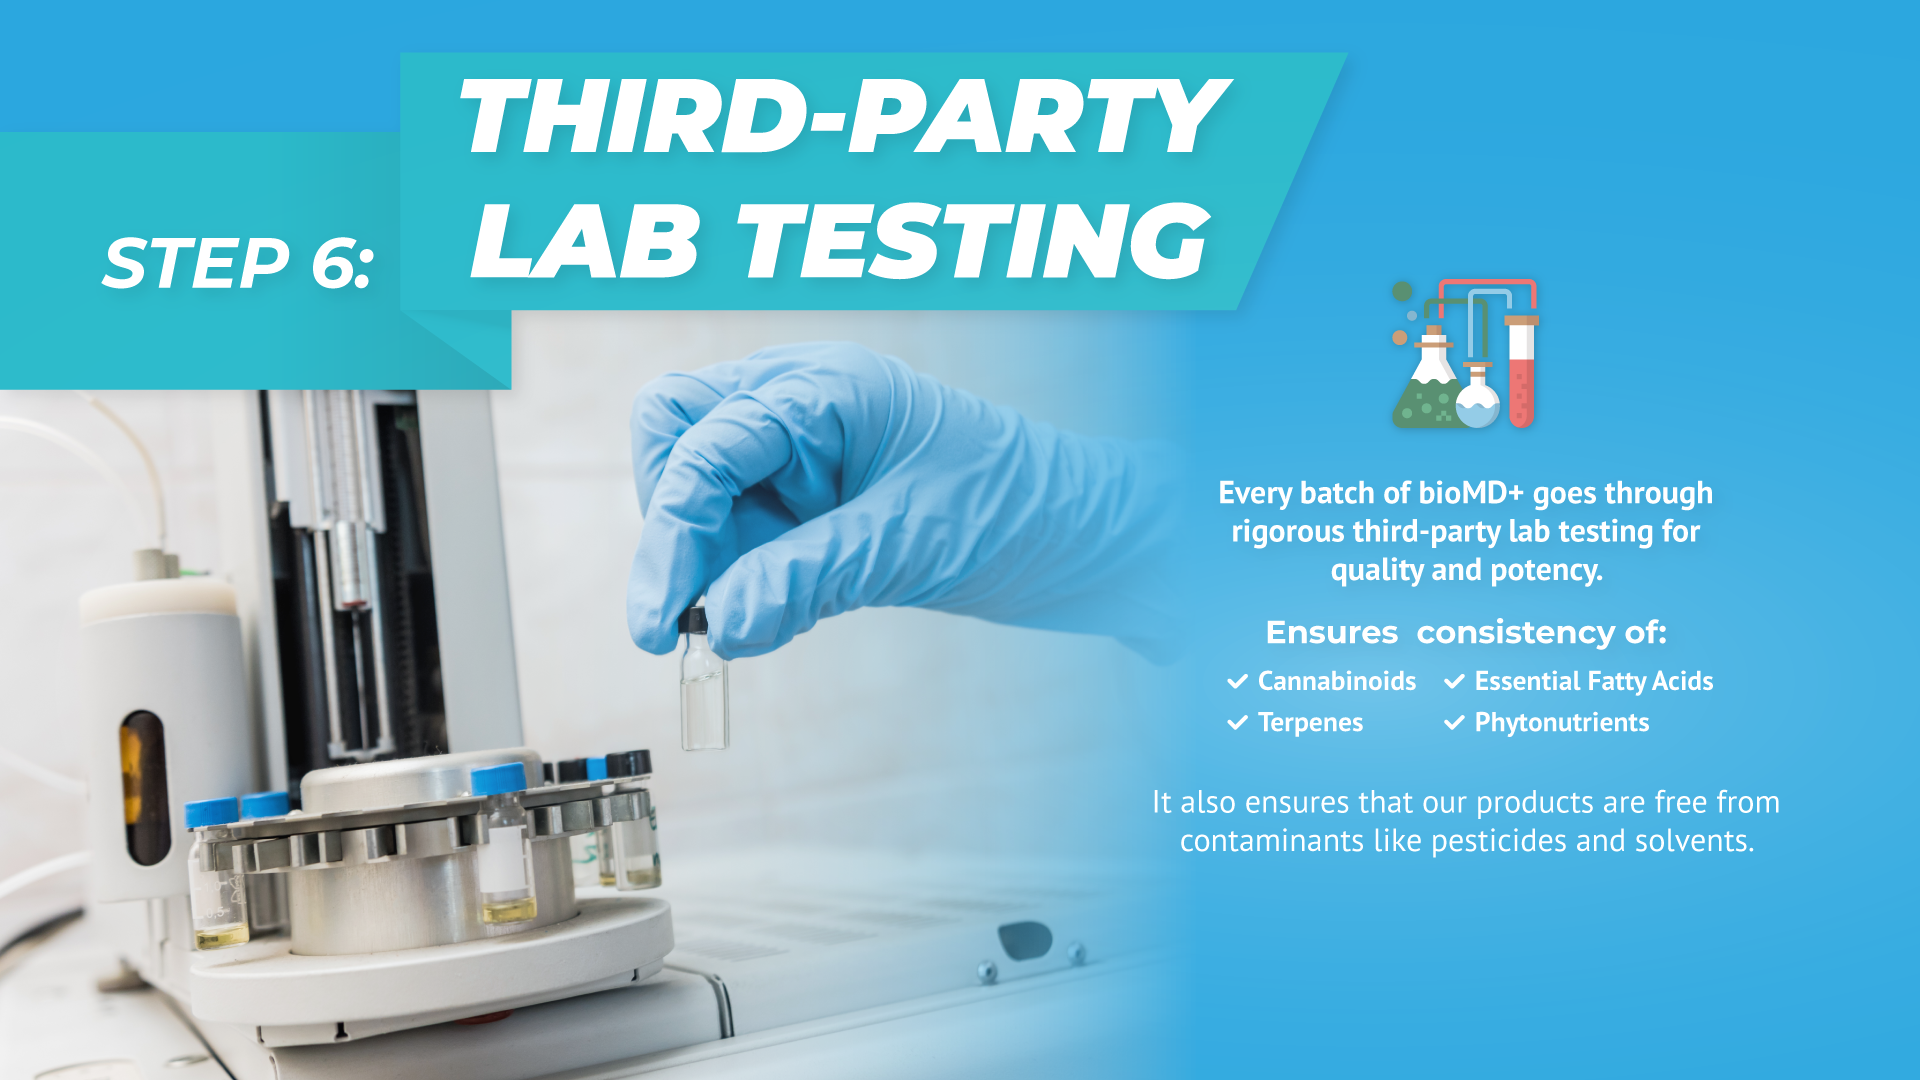 THIRD-PARTY LAB TESTING Every batch of product goes through rigorous third-party lab testing for quality and potency. This makes sure that the cannabinoids, terpenes, essential fatty acids and phytonutrients are consistent. It also ensures that our products are free from contaminants like pesticides and solvents.